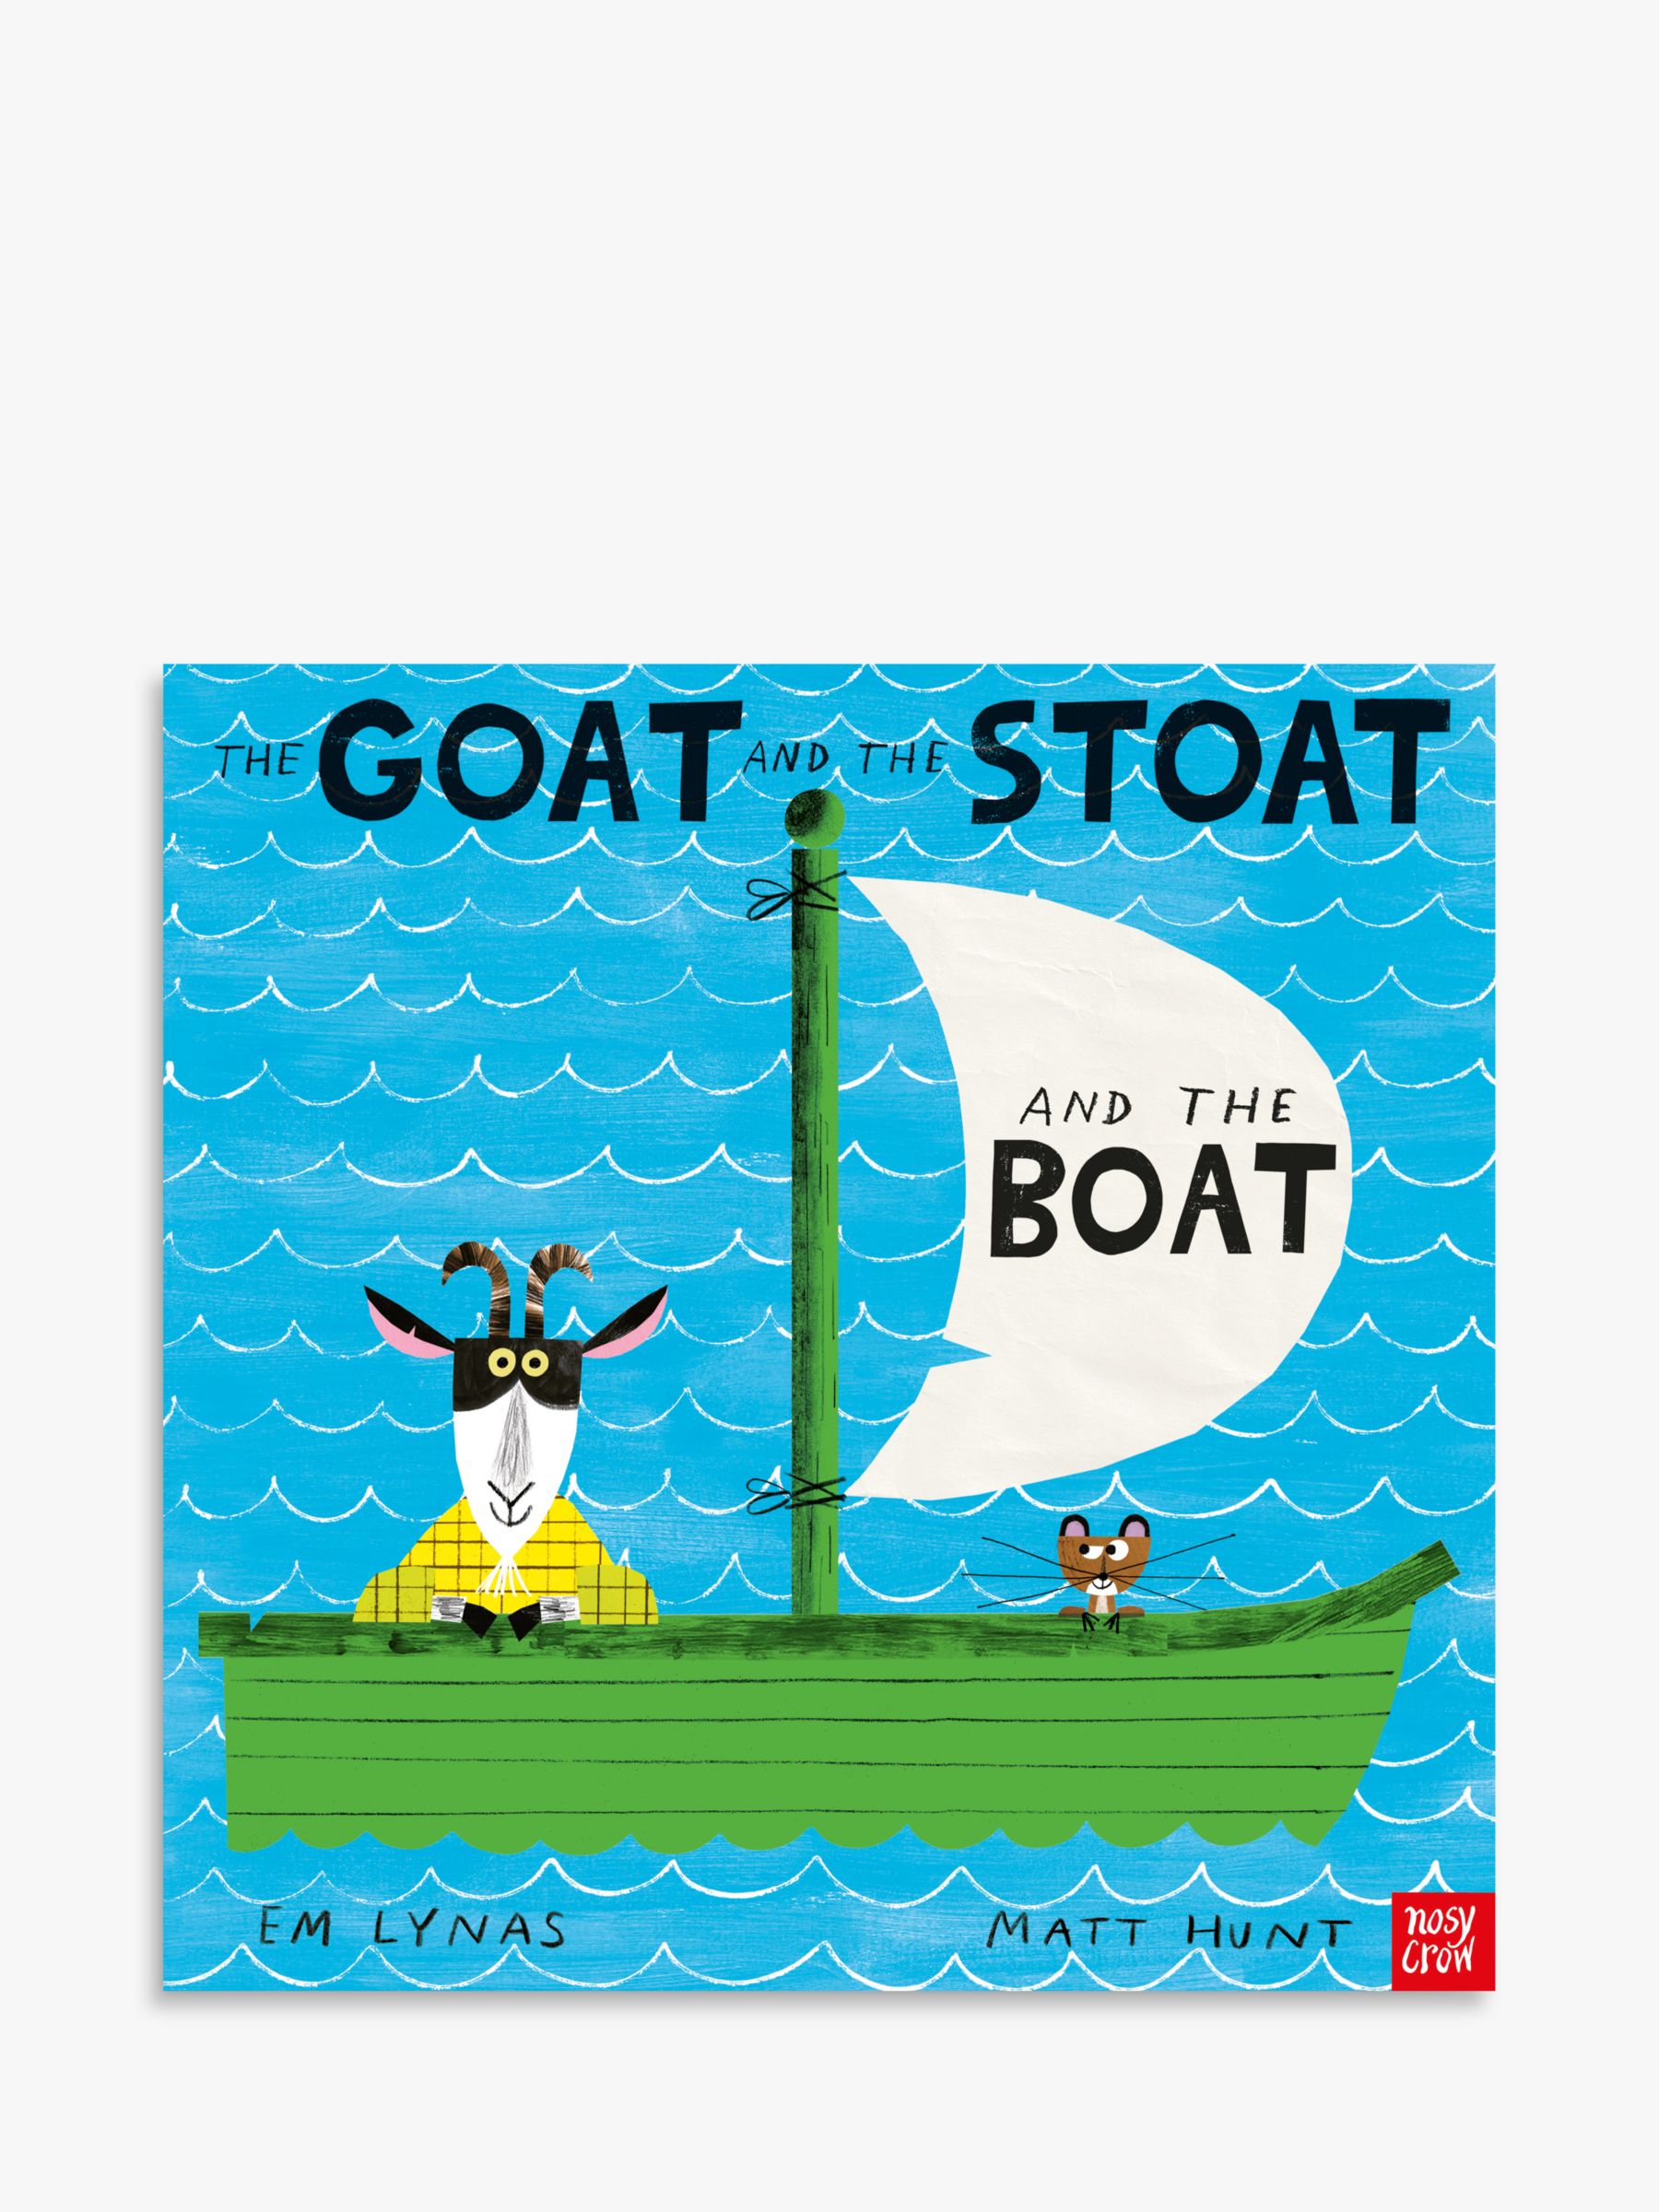 and　and　The　Boat　Kids'　Stoat　Goat　the　the　Book